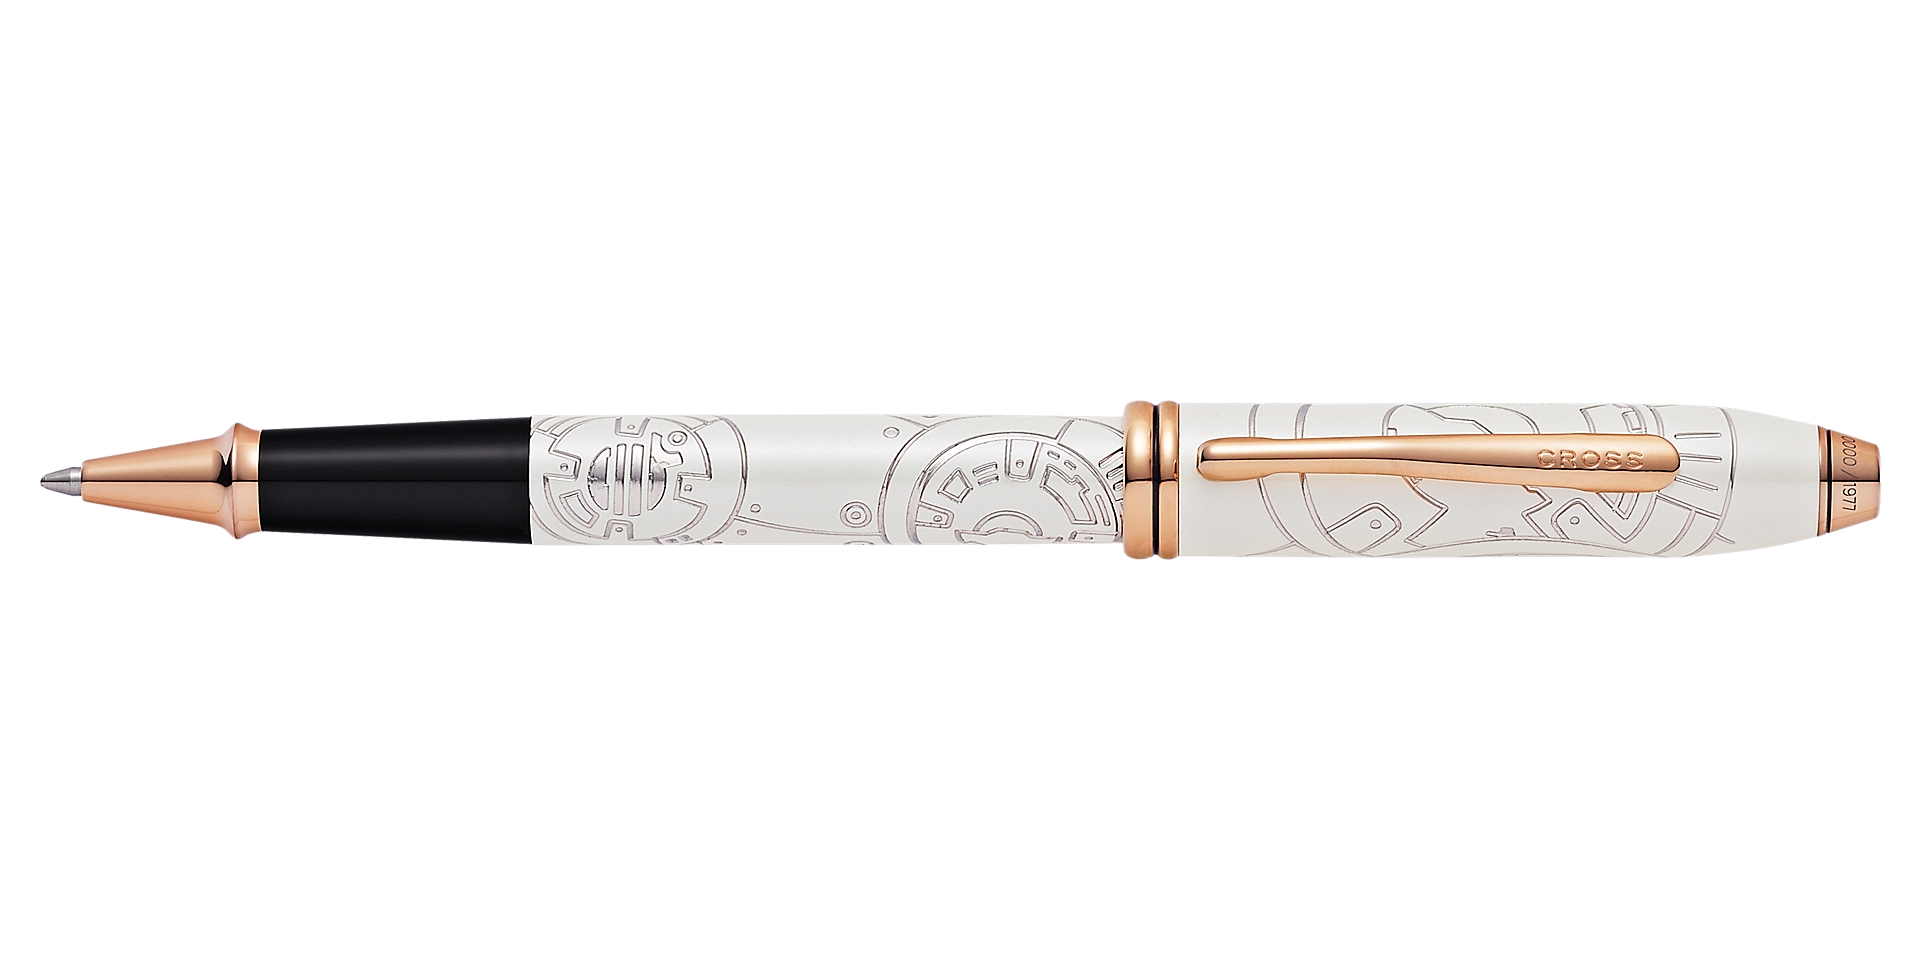  Townsend Star Wars Limited-Edition BB-8™ Rollerball Pen